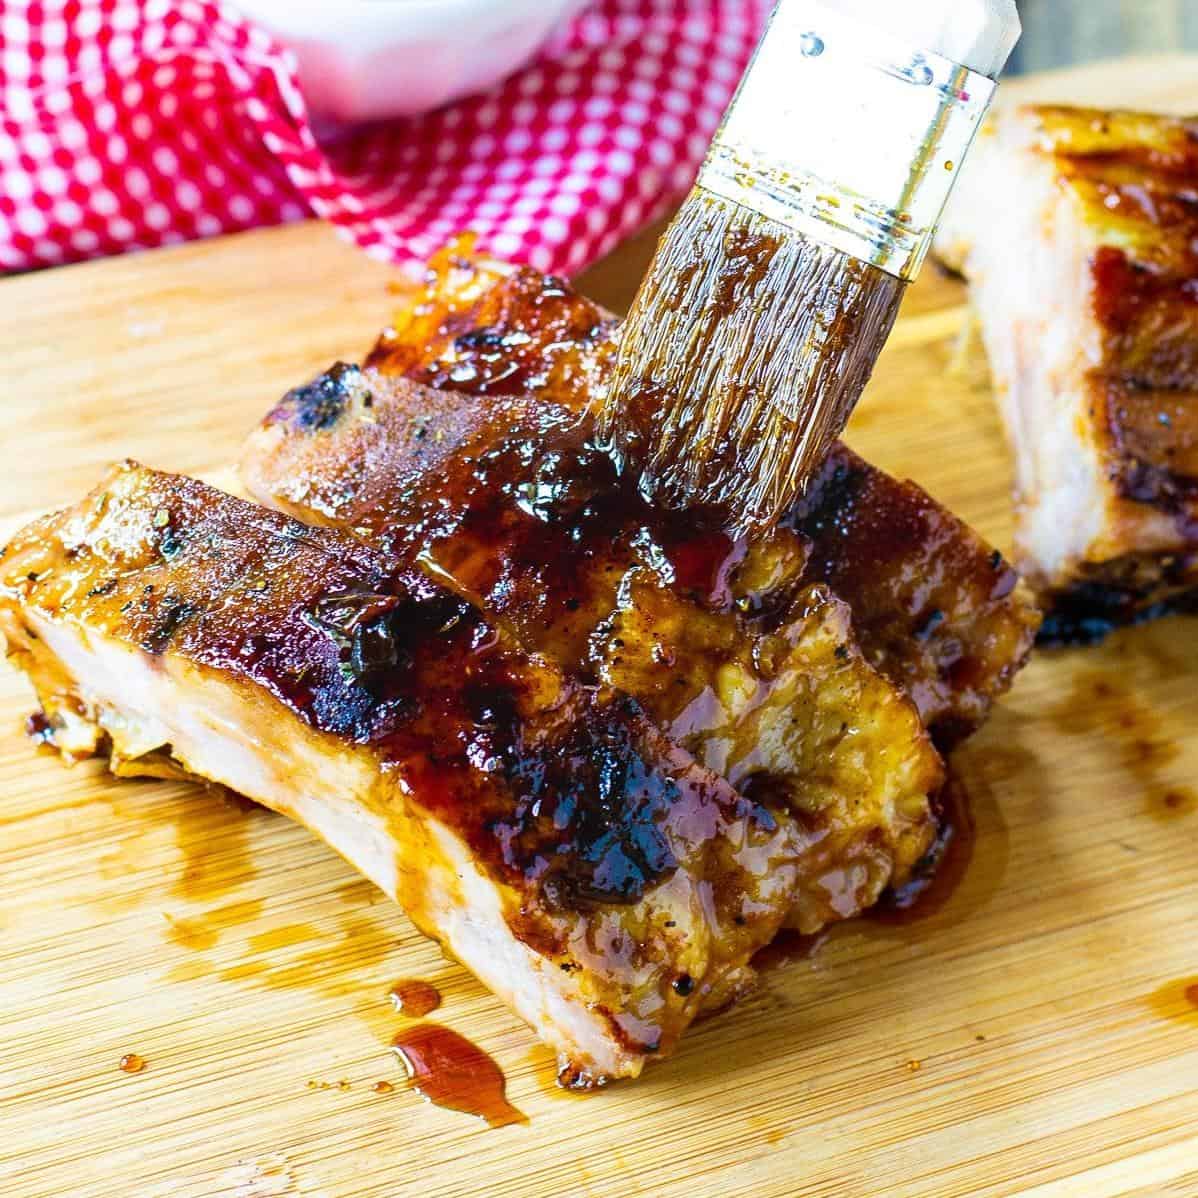  Get ready to lick your fingers with these delicious Jack Daniel's Ribs.